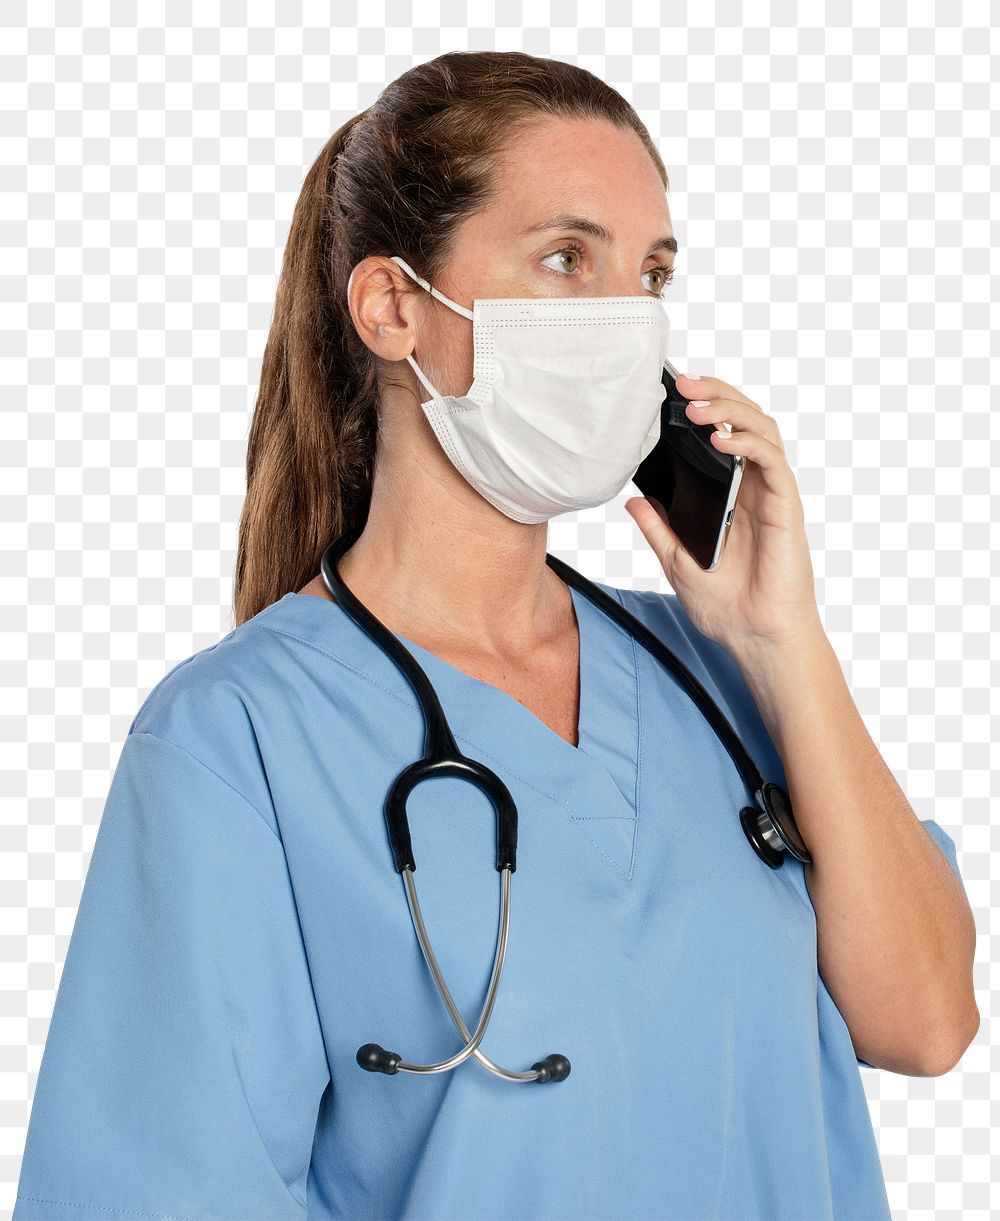 Female doctor png mockup talking on the phone